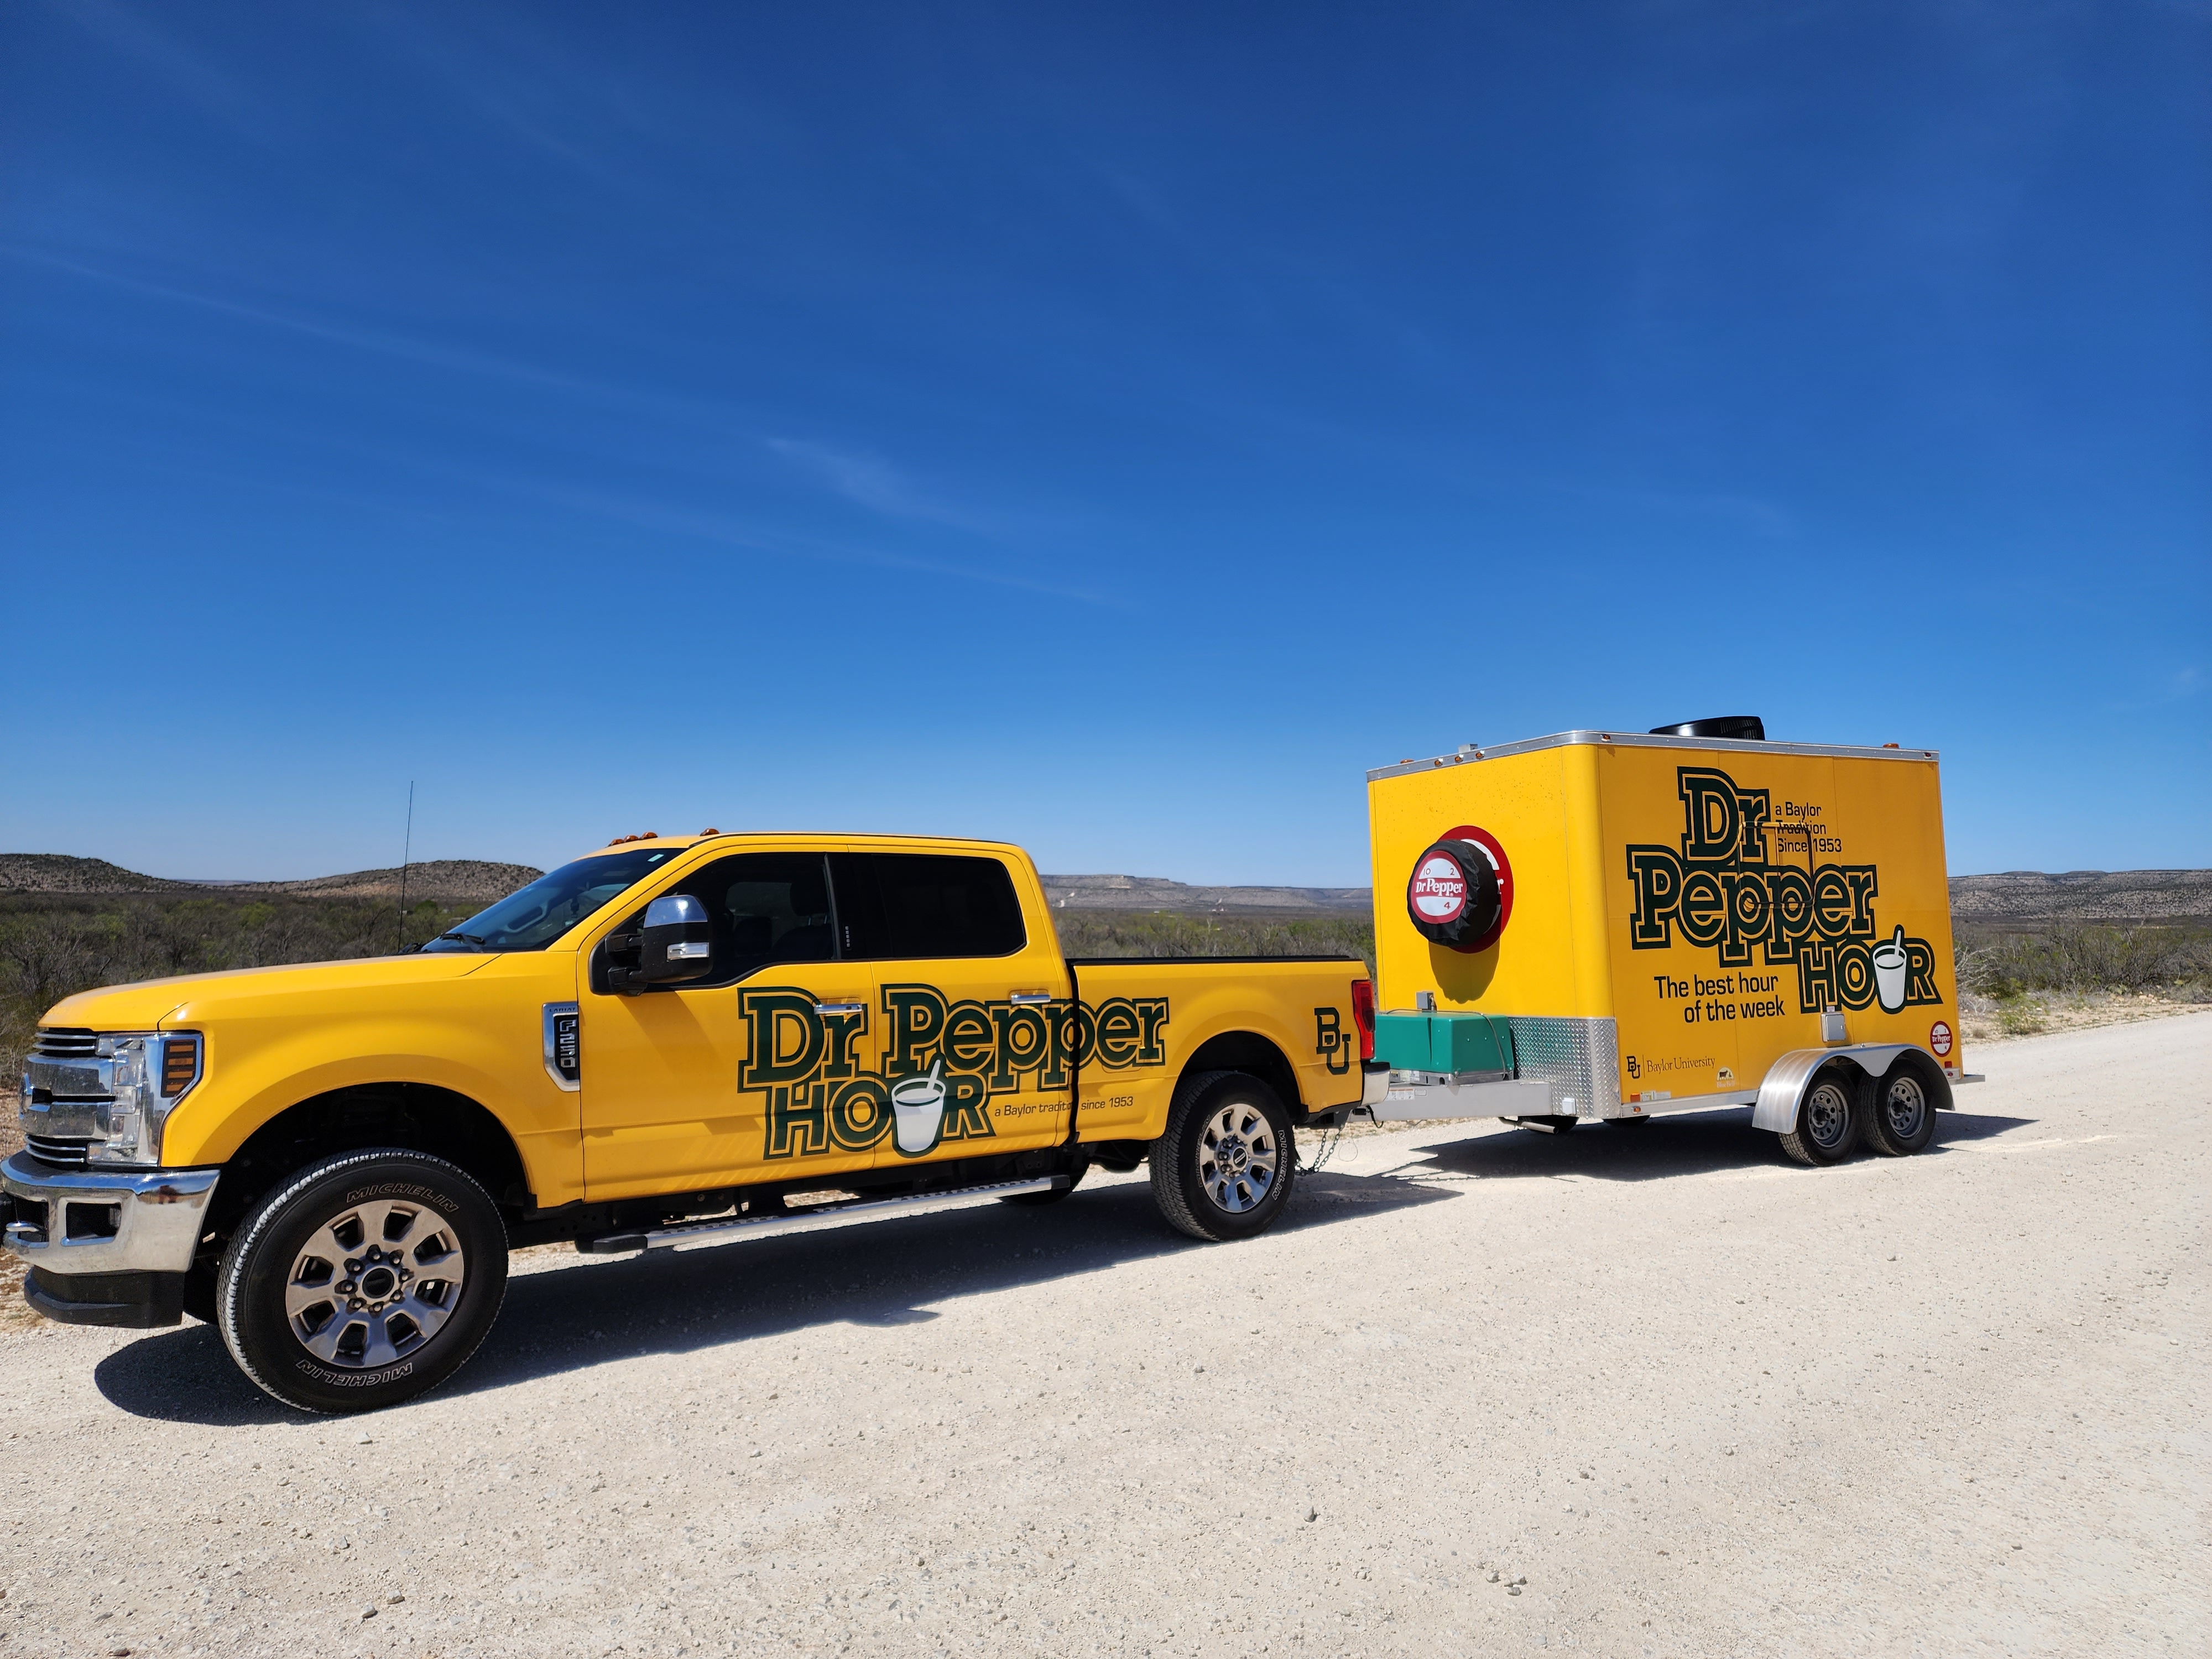 Dr Pepper Hour Tour, Baylor-branded truck and trailer in El Paso